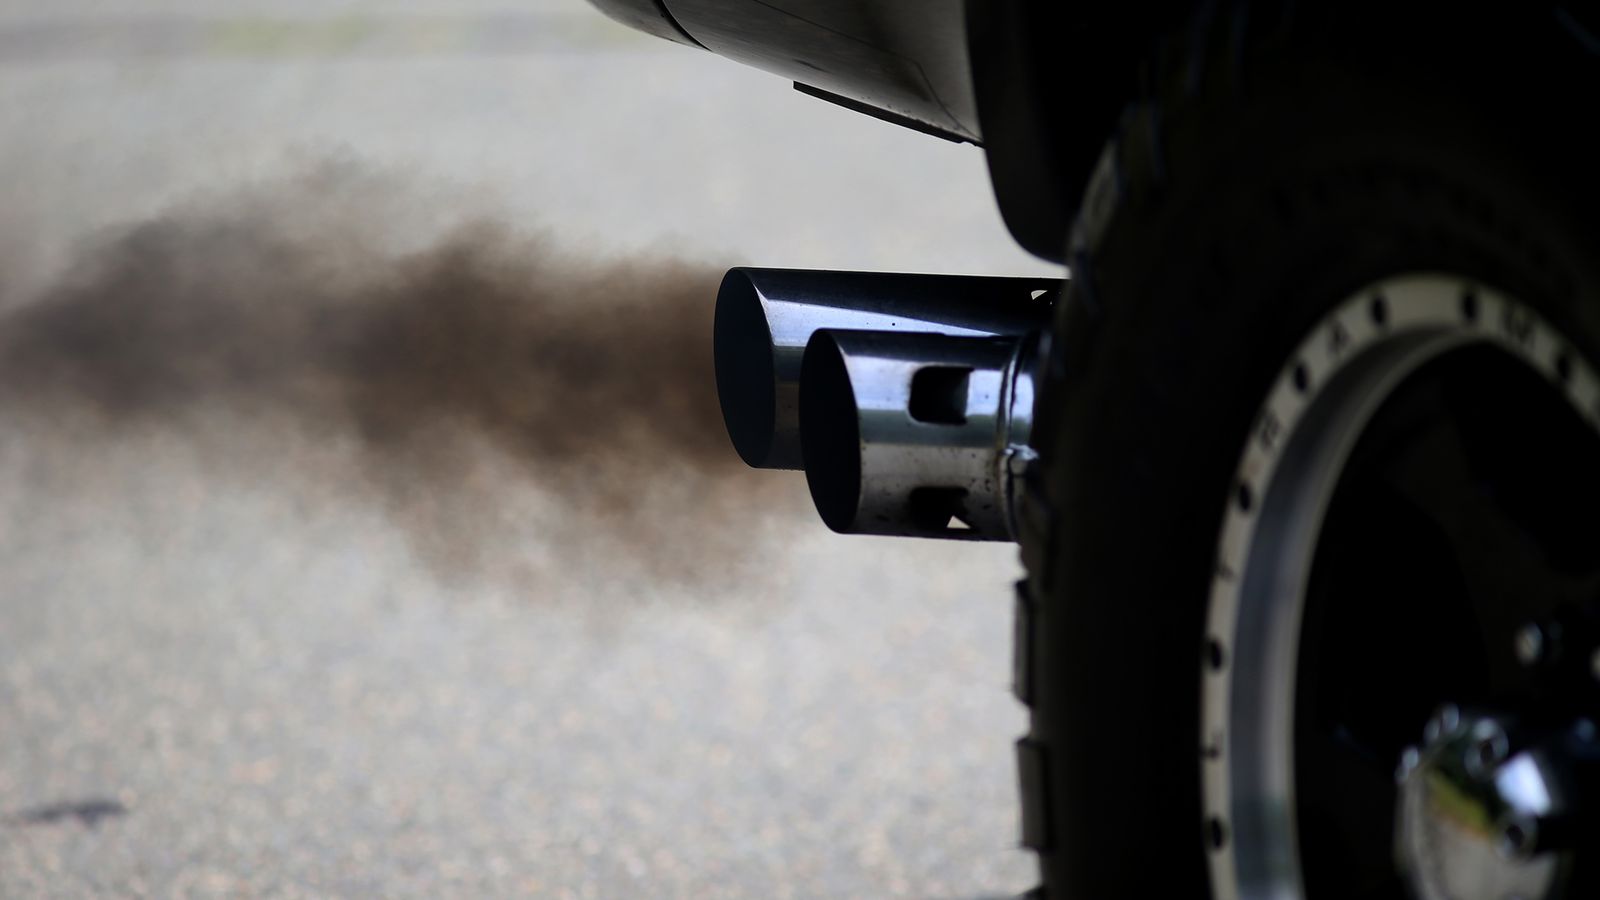 Germany Announces Plan to Cut Diesel Pollution